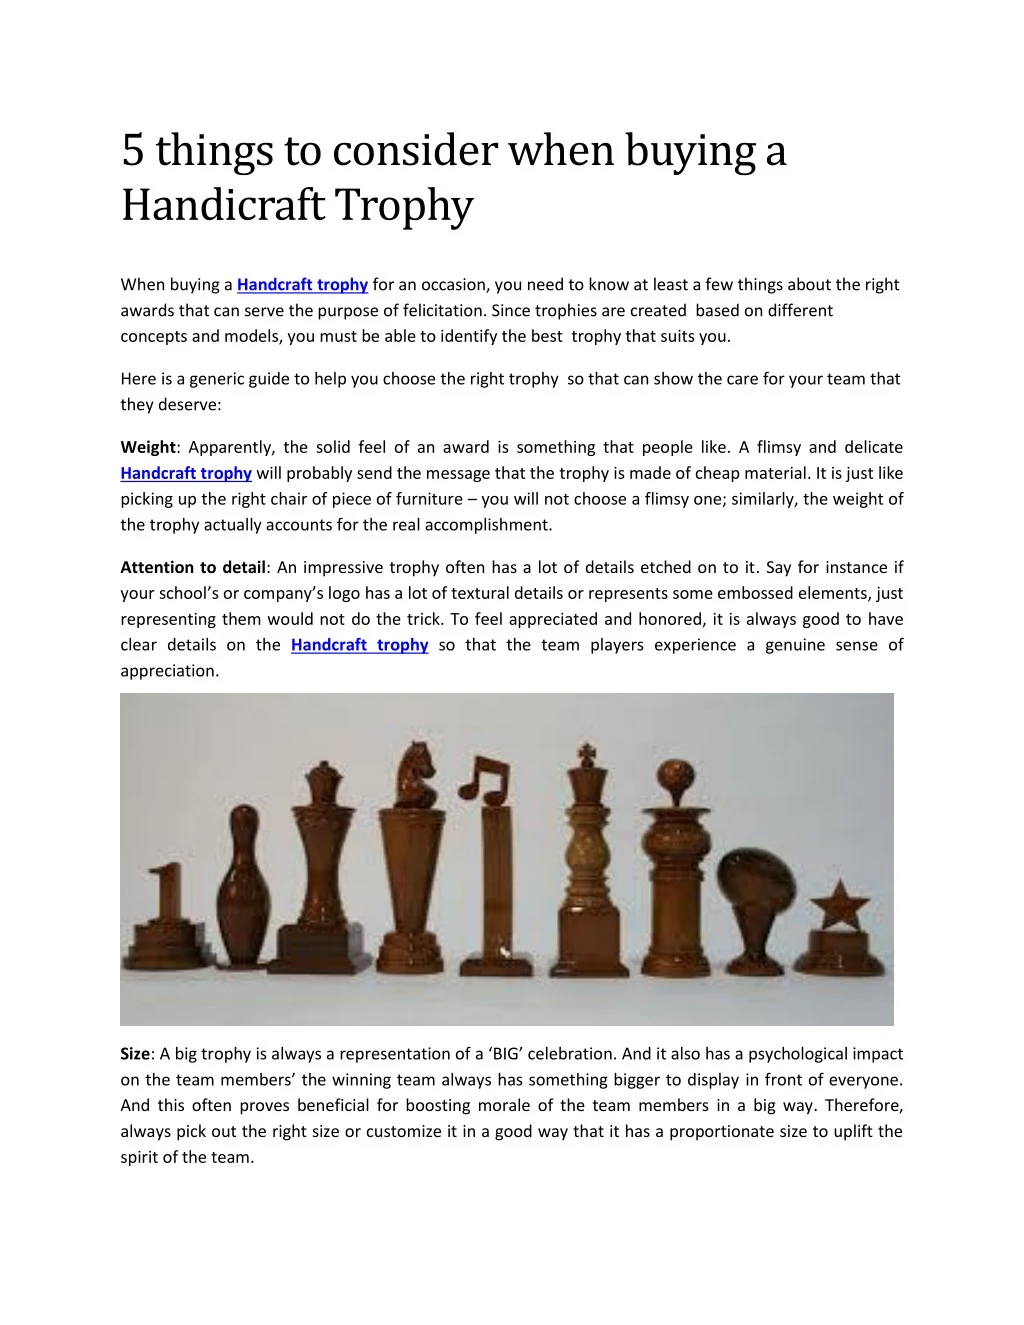 5 things to consider when buying a handicraft